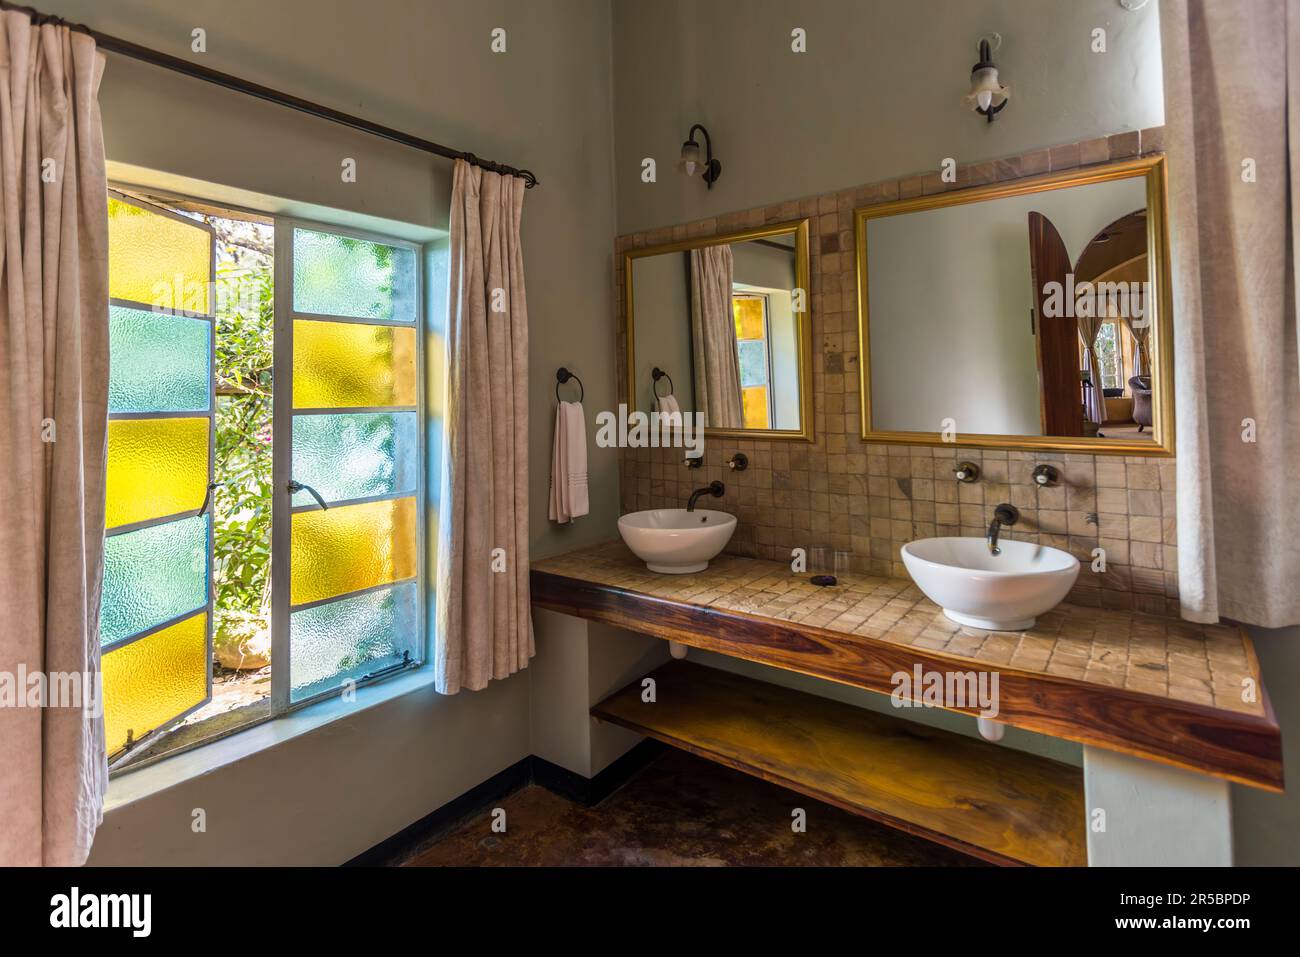 Bathroom Huntingdon House, Satemwa Estate, each suite has a modern bathroom. Huntingdon House near Thyolo (Malawi) has only 5 guest rooms furnished in colonial style. The hotel is the former home of the family that still owns the Satemwa tea and coffee plantation Stock Photo